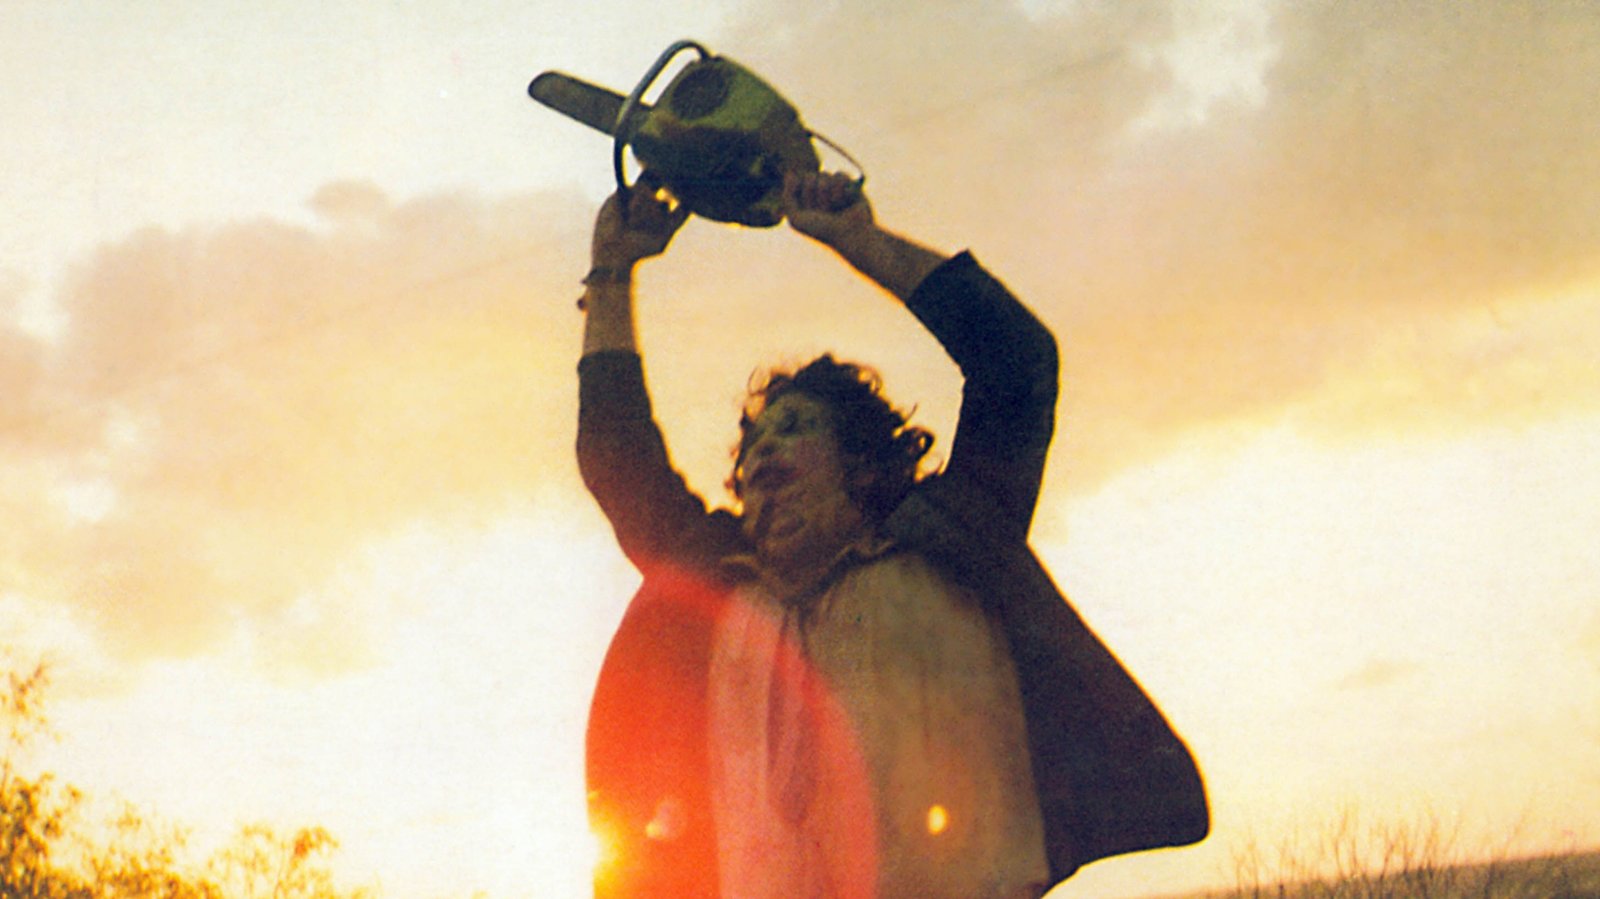 Leatherface swings his chainsaw around as the sun comes up in 'The Texas Chainsaw Massacre.' 